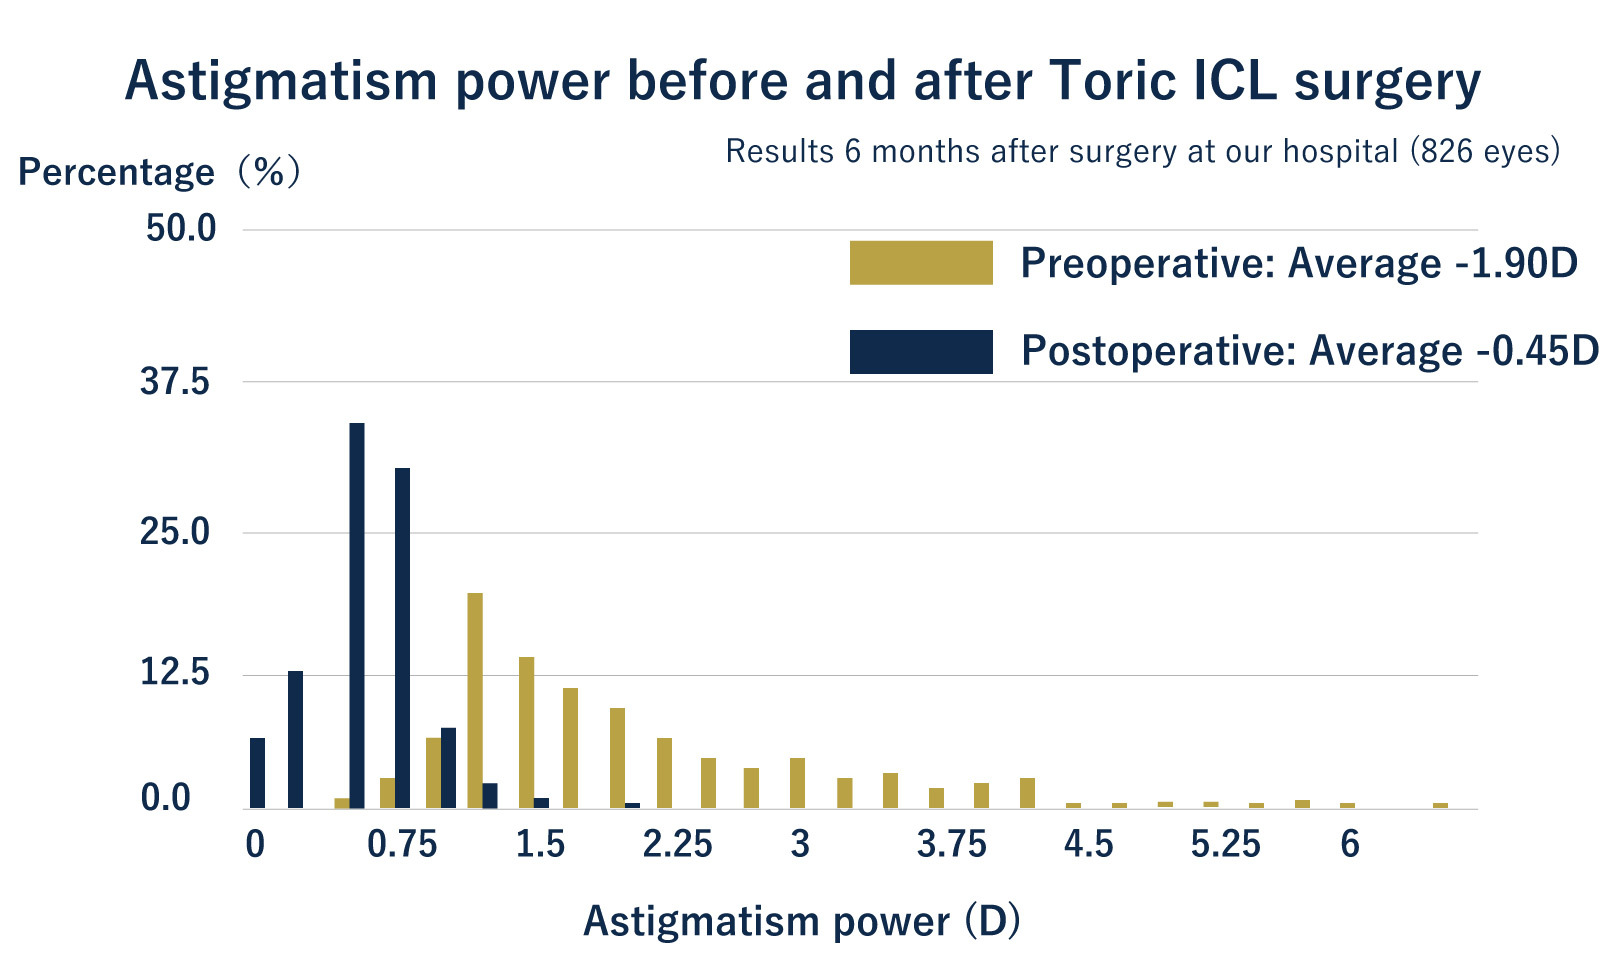 Astigmatism power before and after ICL surgery with astigmatism